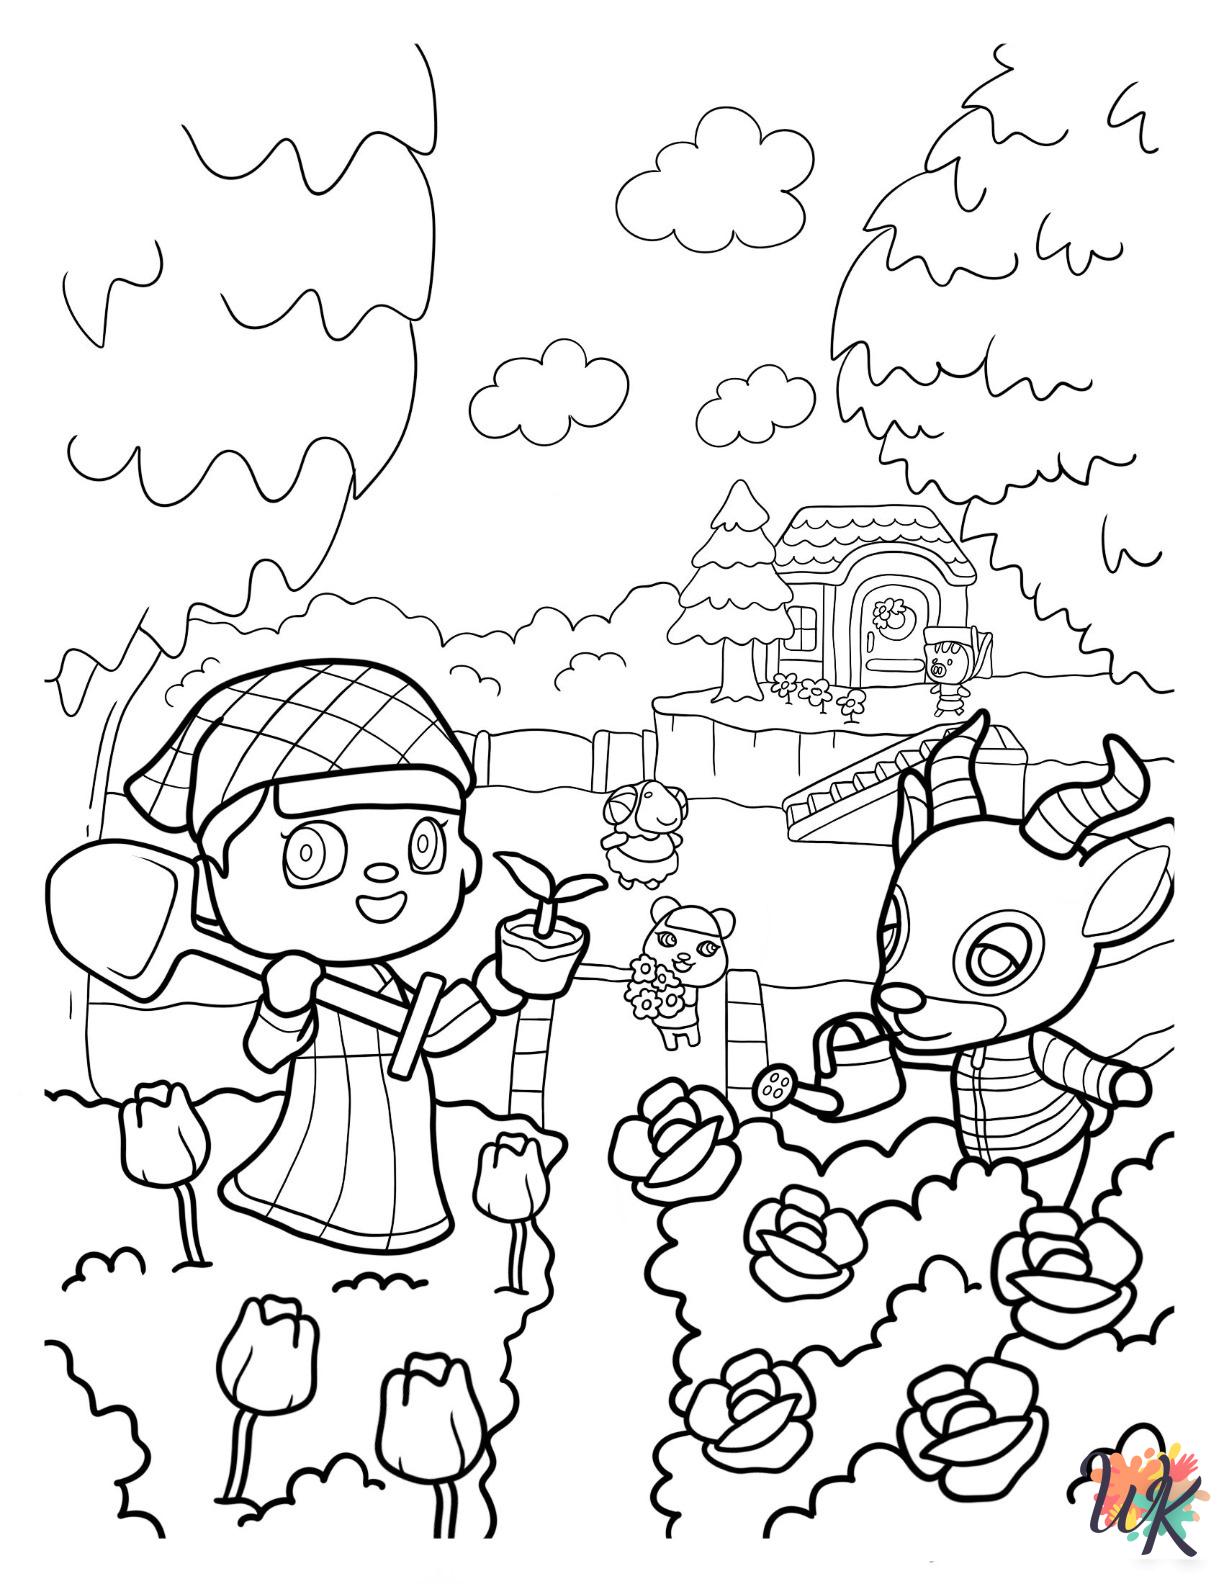 Animal Crossing coloring pages for kids